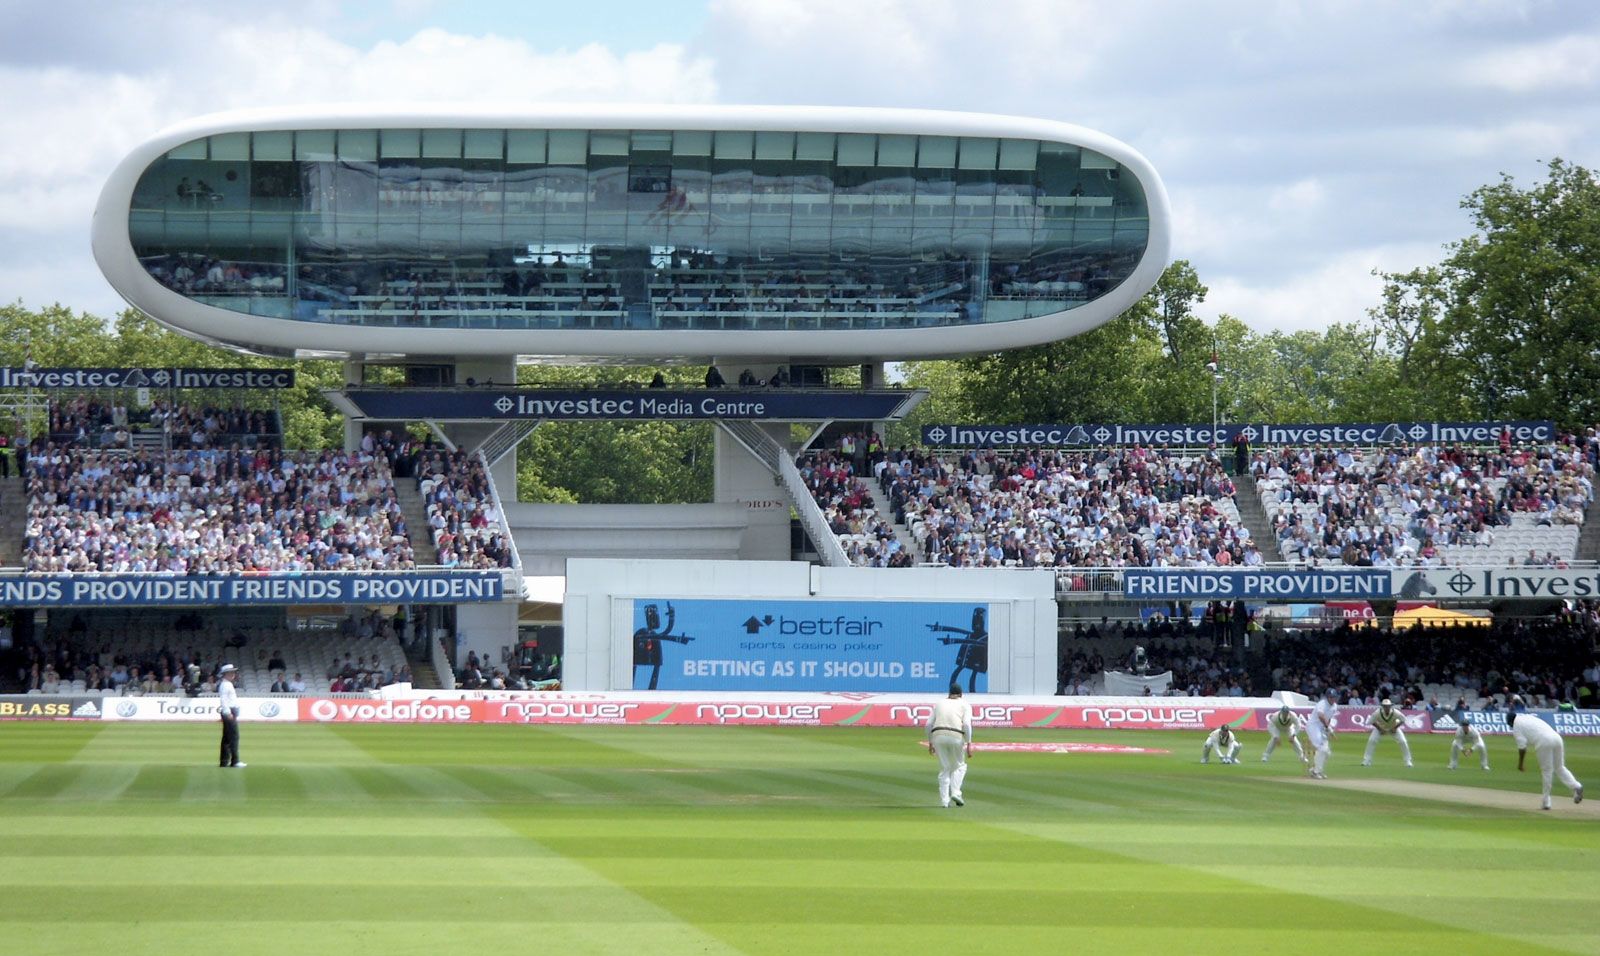 Ashes 2023 Lord's Test records, pitch report, average scores, highest